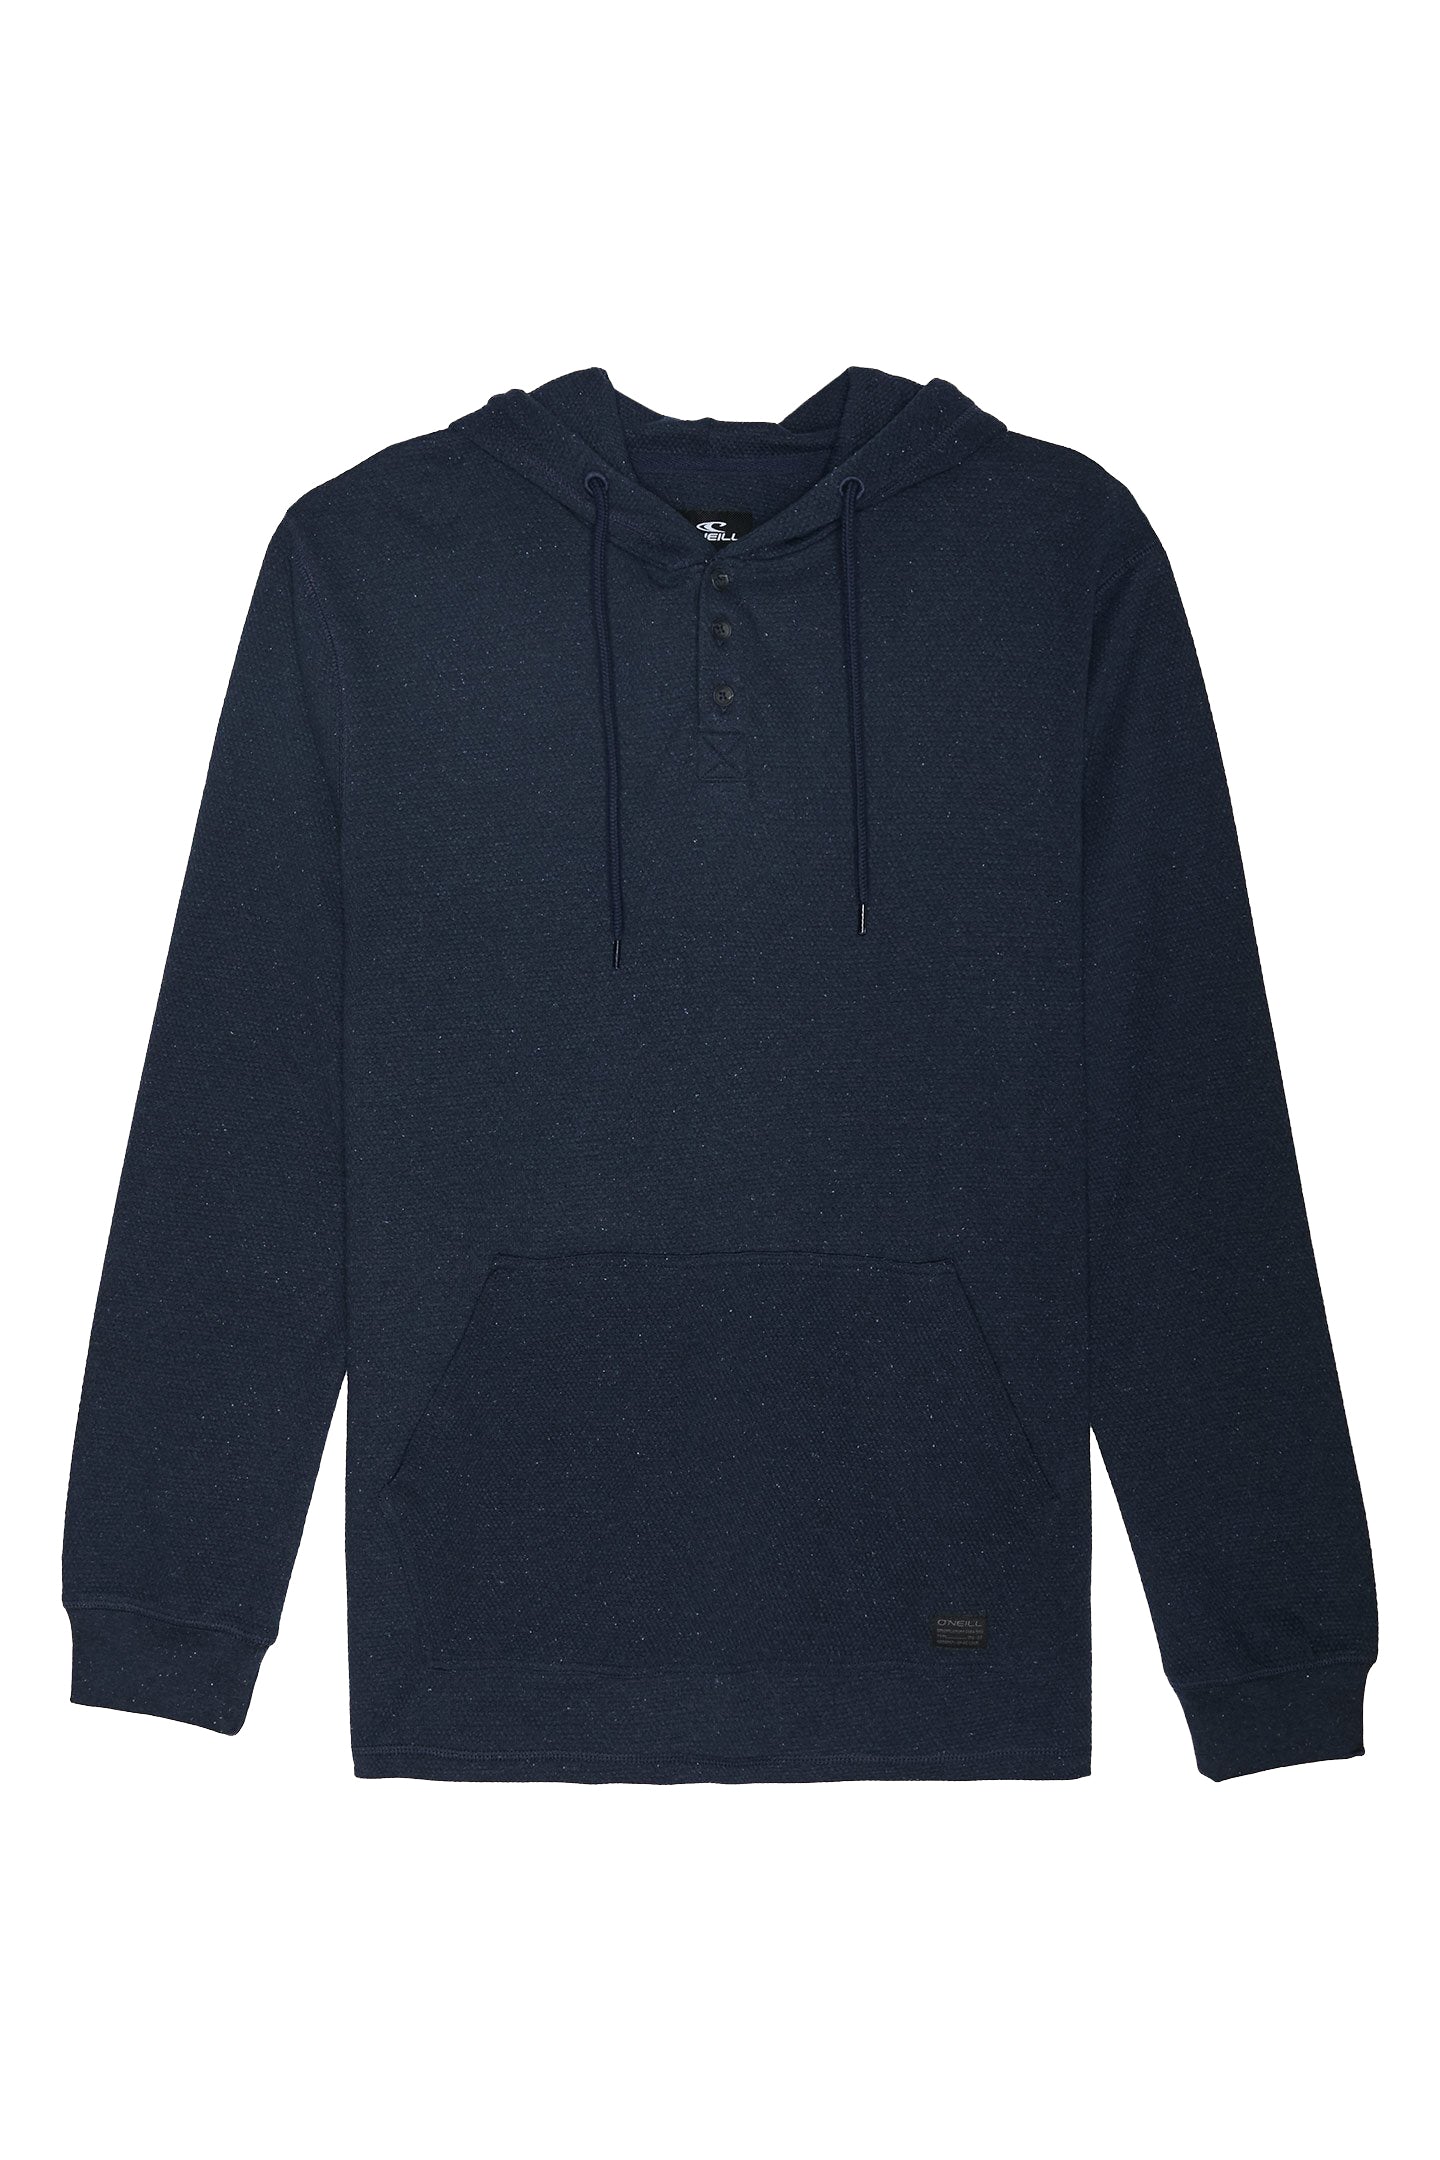 O'neill Apollo Pullover Hoodie NVY-Navy L